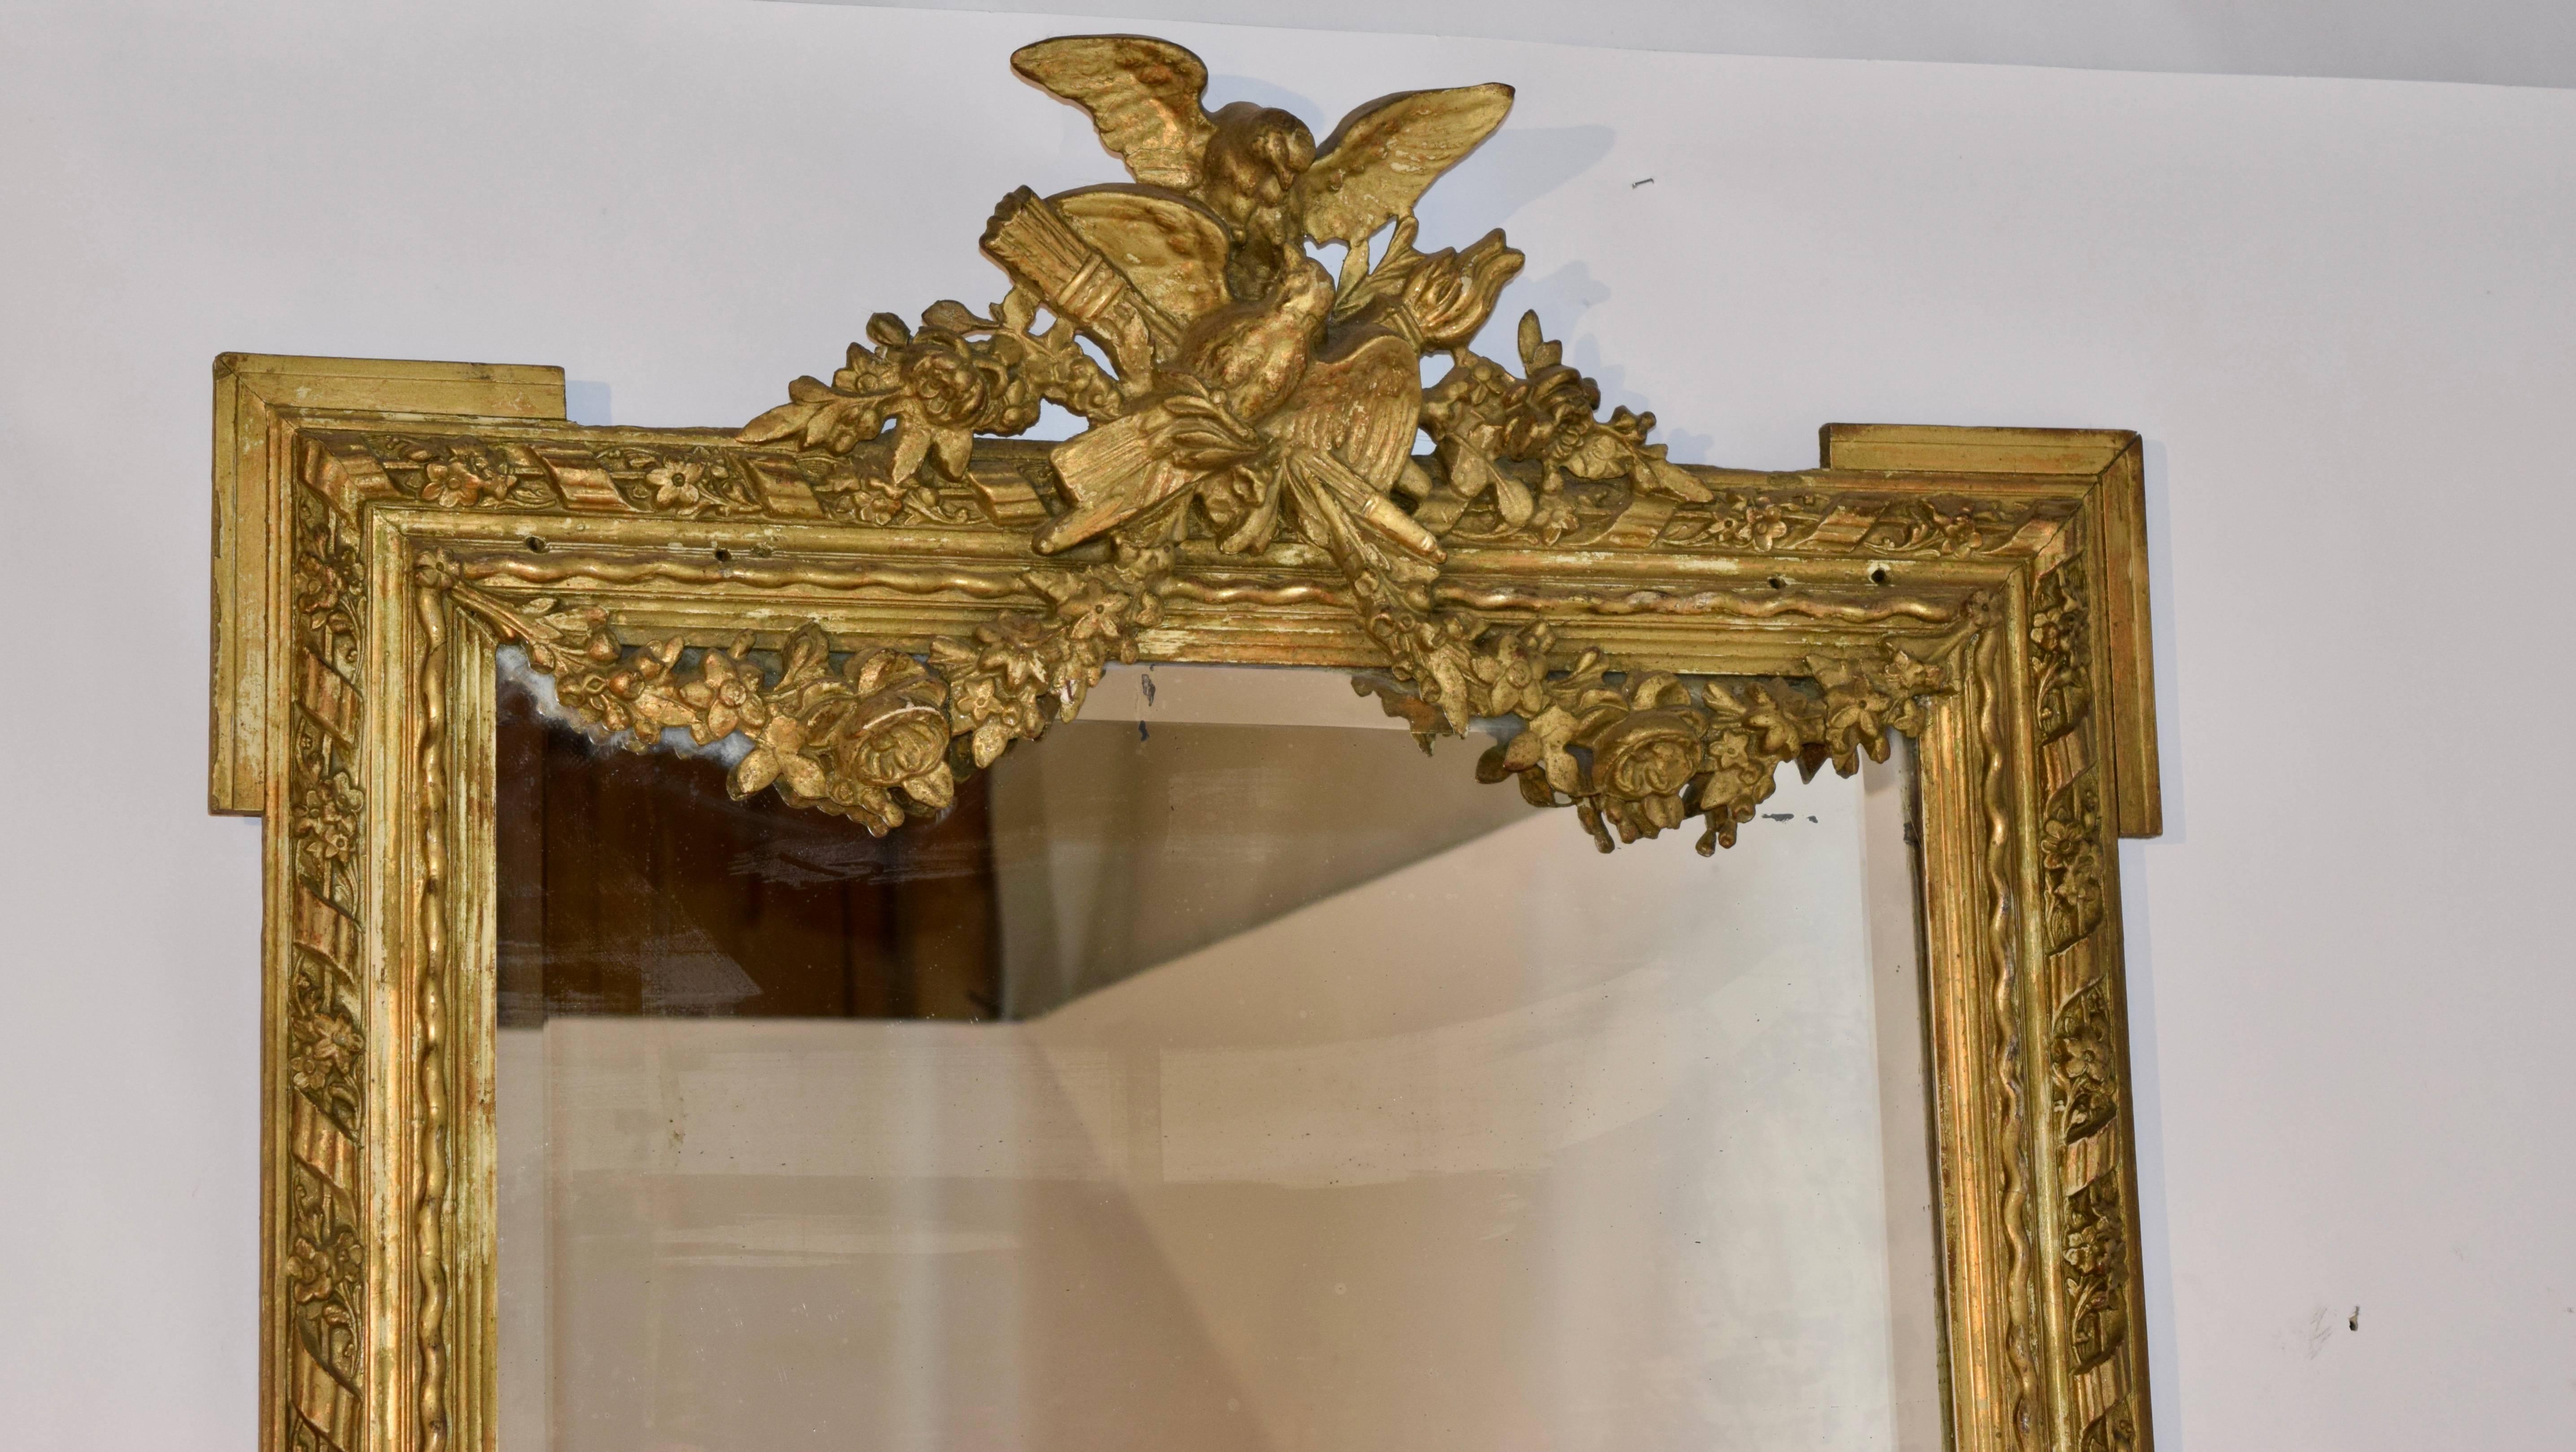 19th century large wall mirror from France. Gorgeous frame with ribbons and flowers, ending in a wonderful floral swag at the top with two birds. Small holes in top of frame where it used to be mounted to a wall.  Original mercury glass mirror has